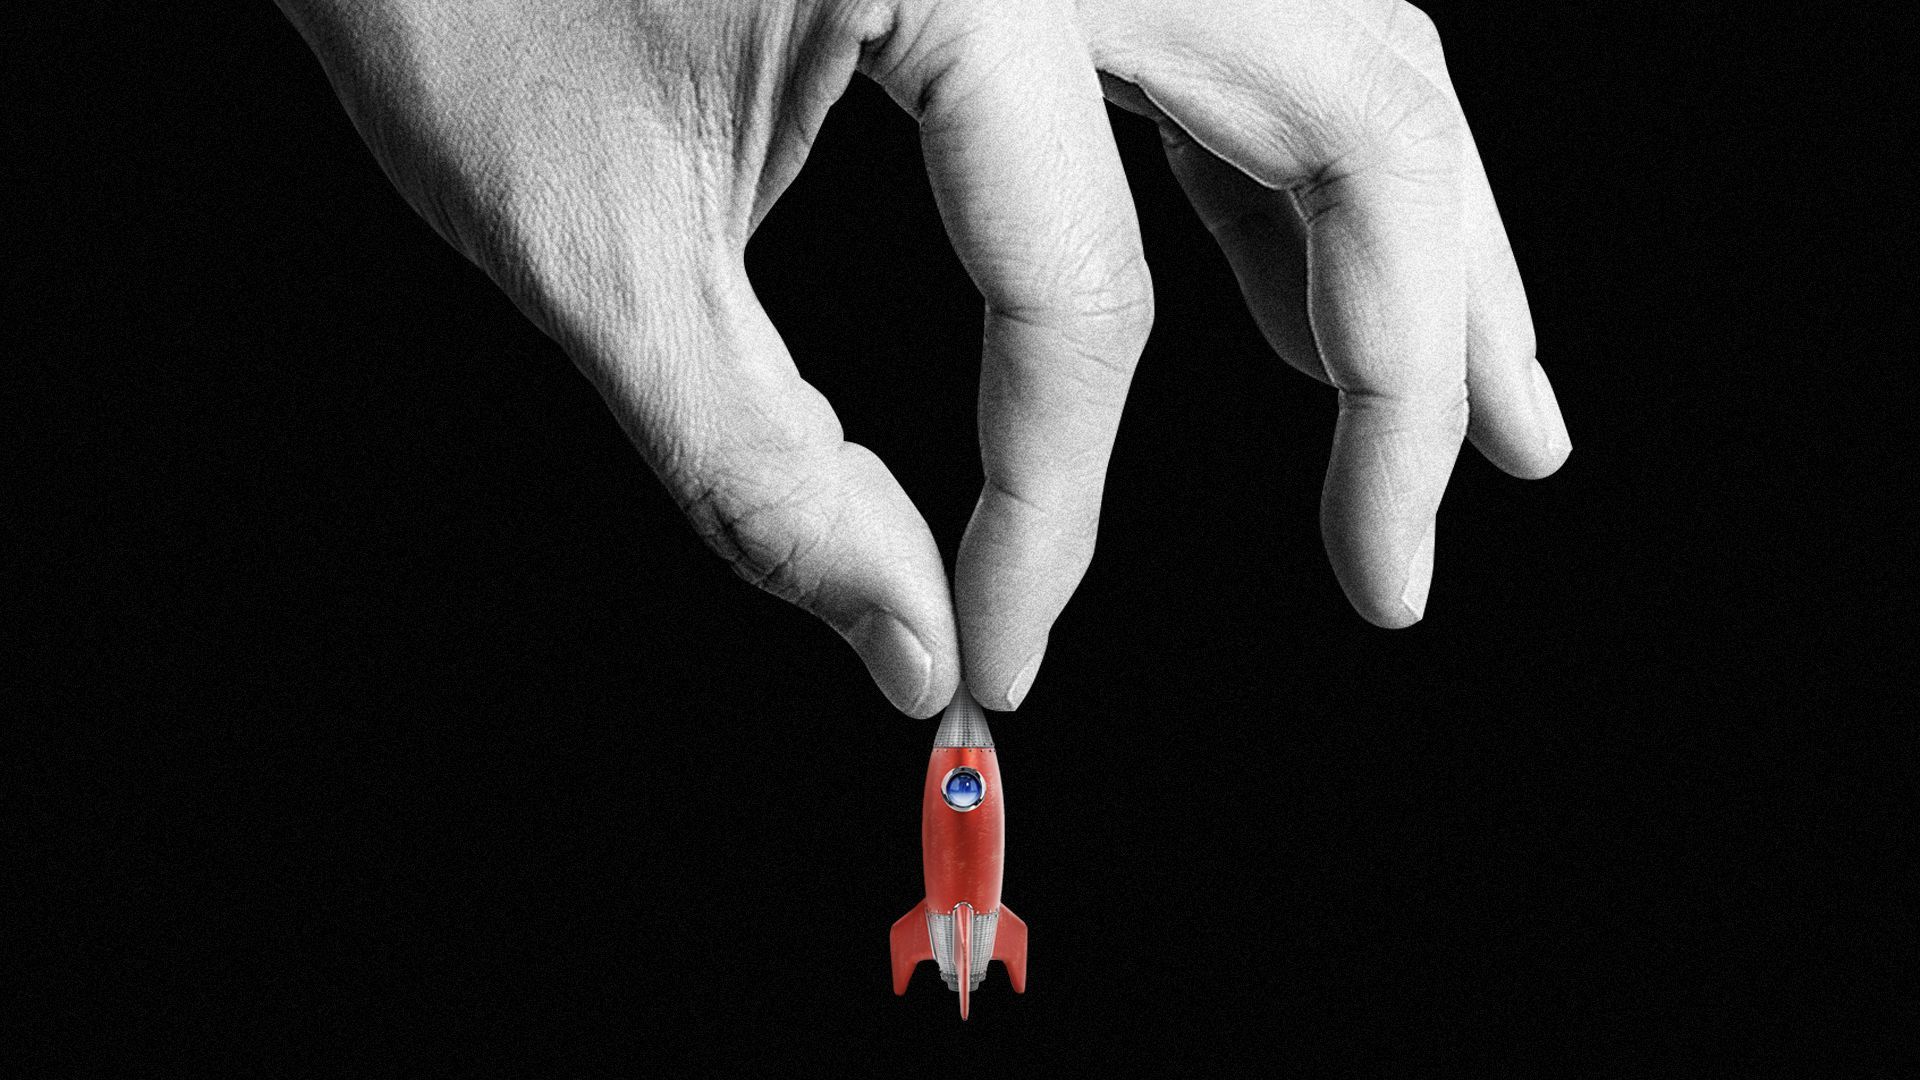 Illustration of a giant hand holding a rocket between its thumb and forefinger